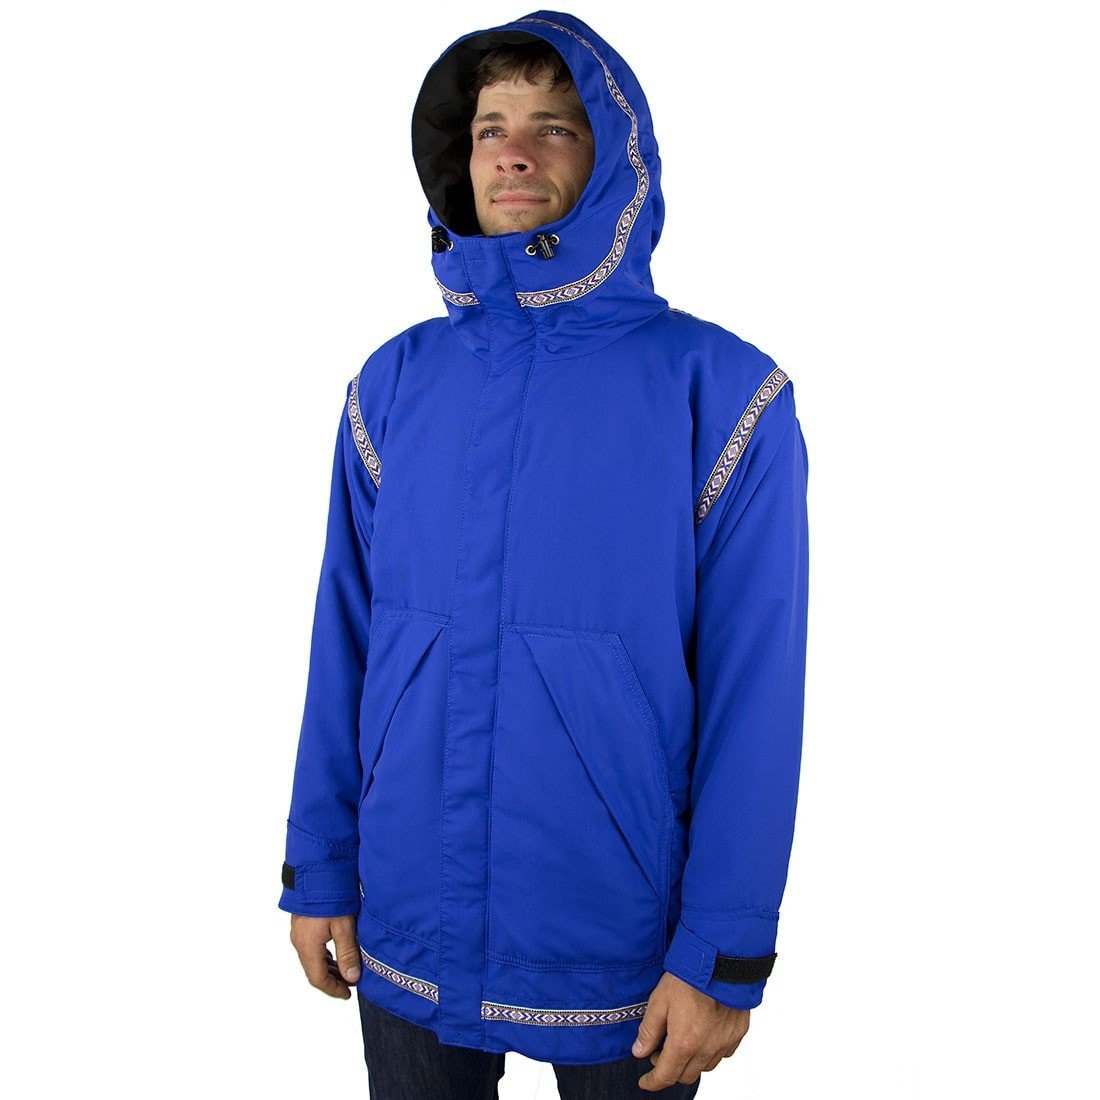 Expedition Shell Anorak Full Zip (Men's)-Made in Ely,